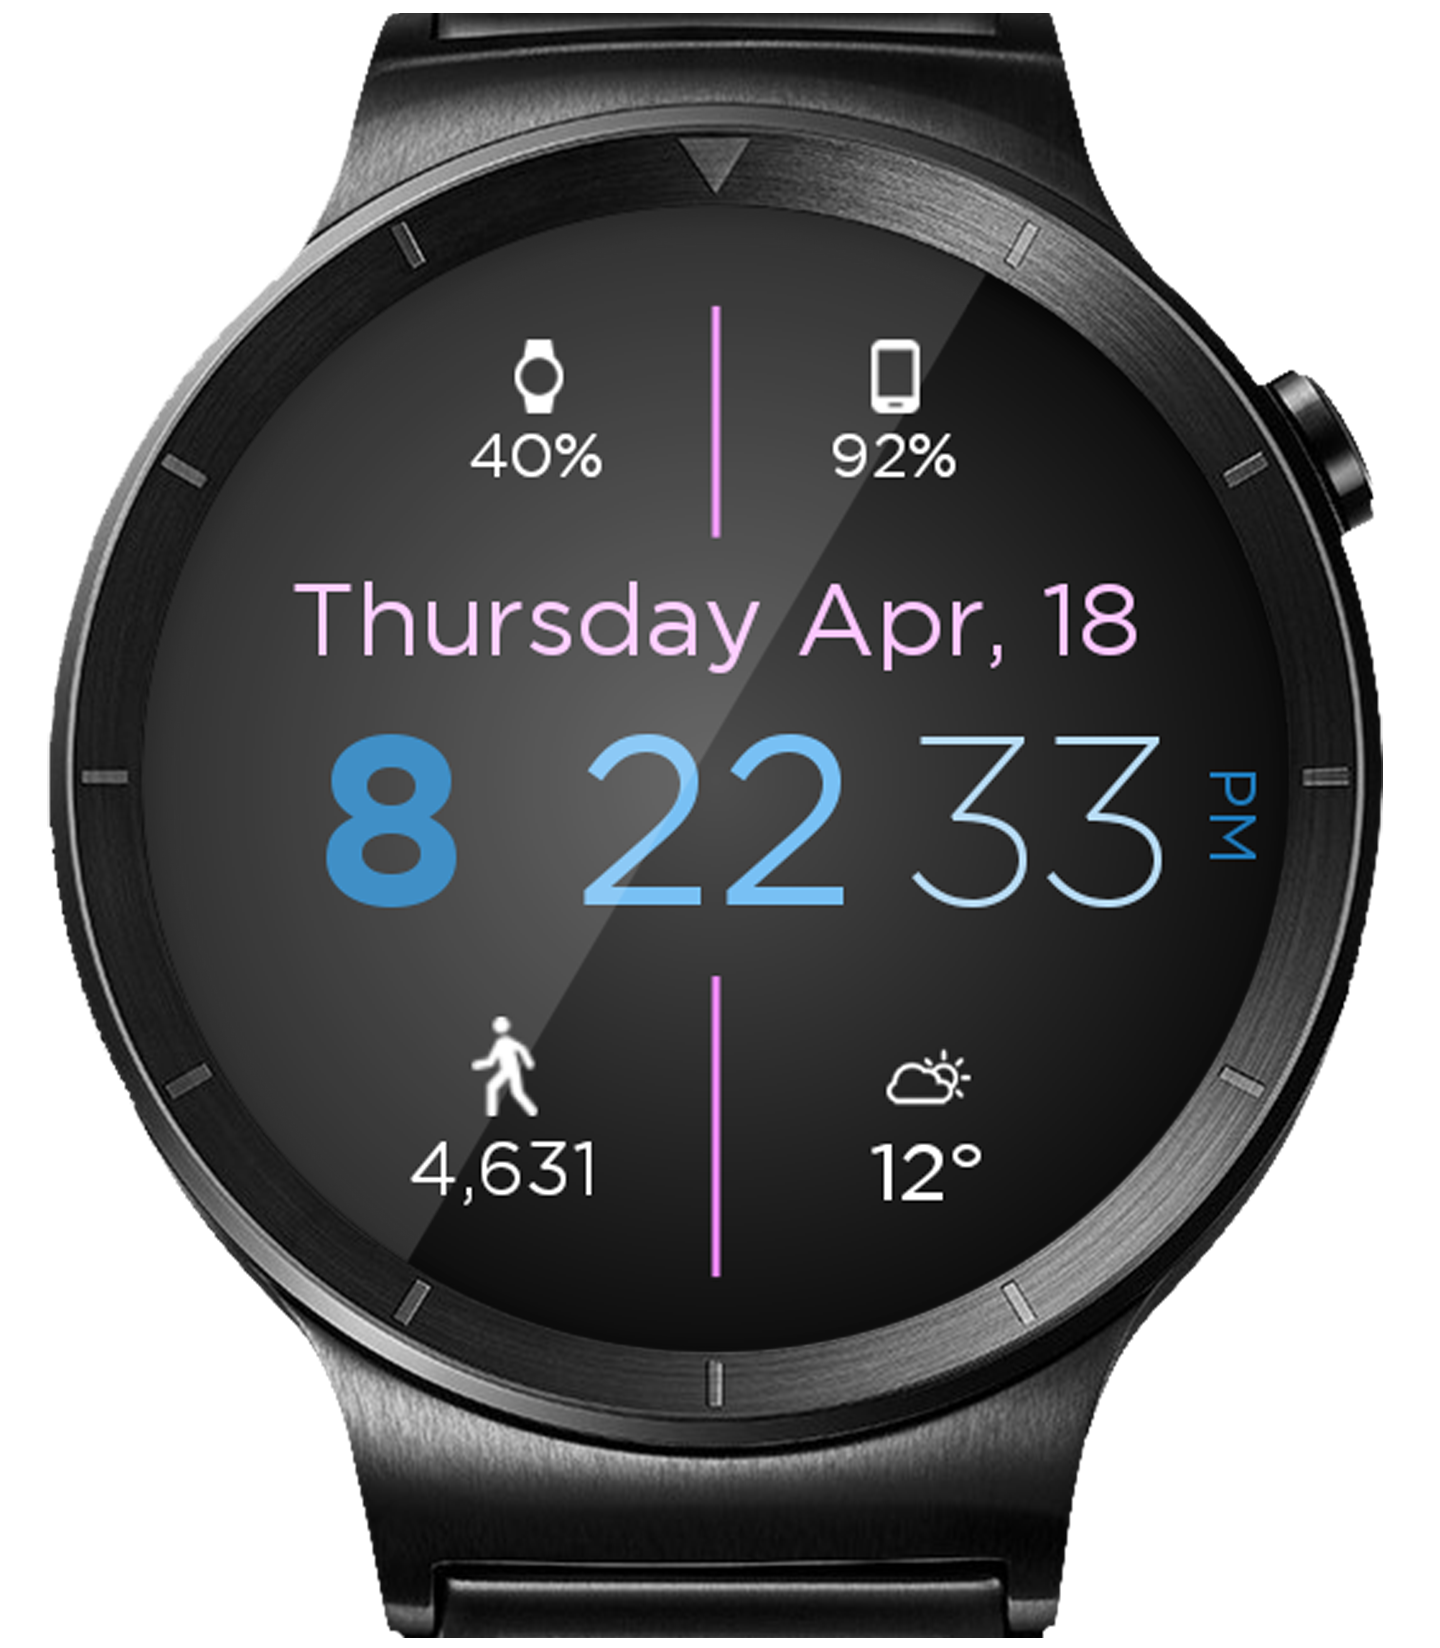 37 new and notable Wear OS watch faces from the last three months (3/16